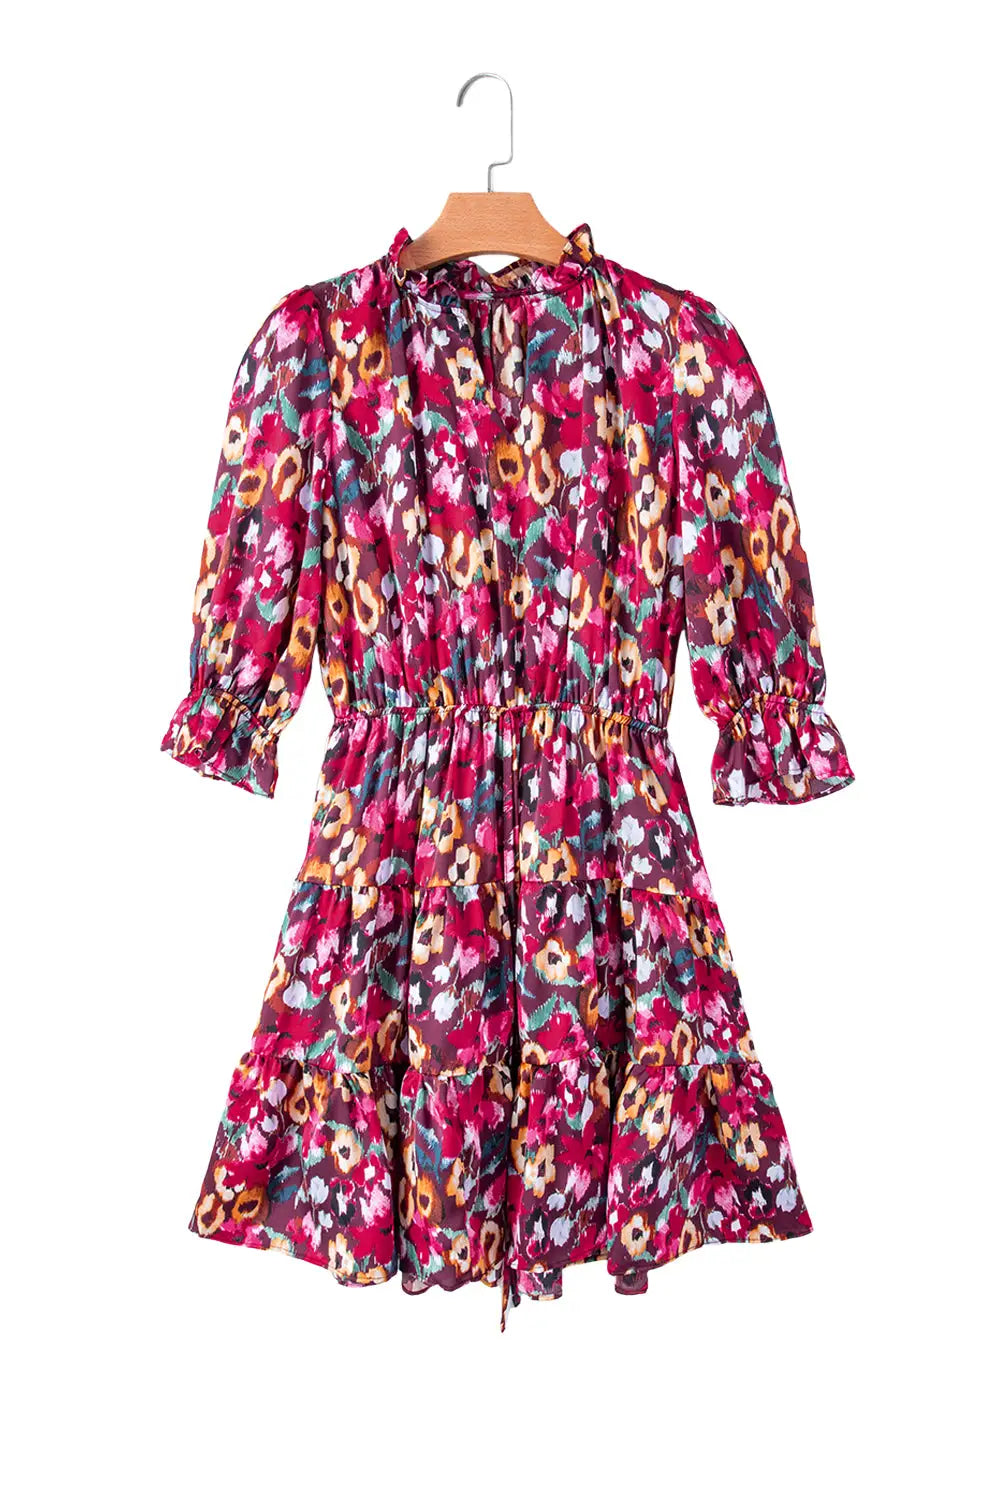 Chicago floral tiered ruffled dress - dresses/floral dresses